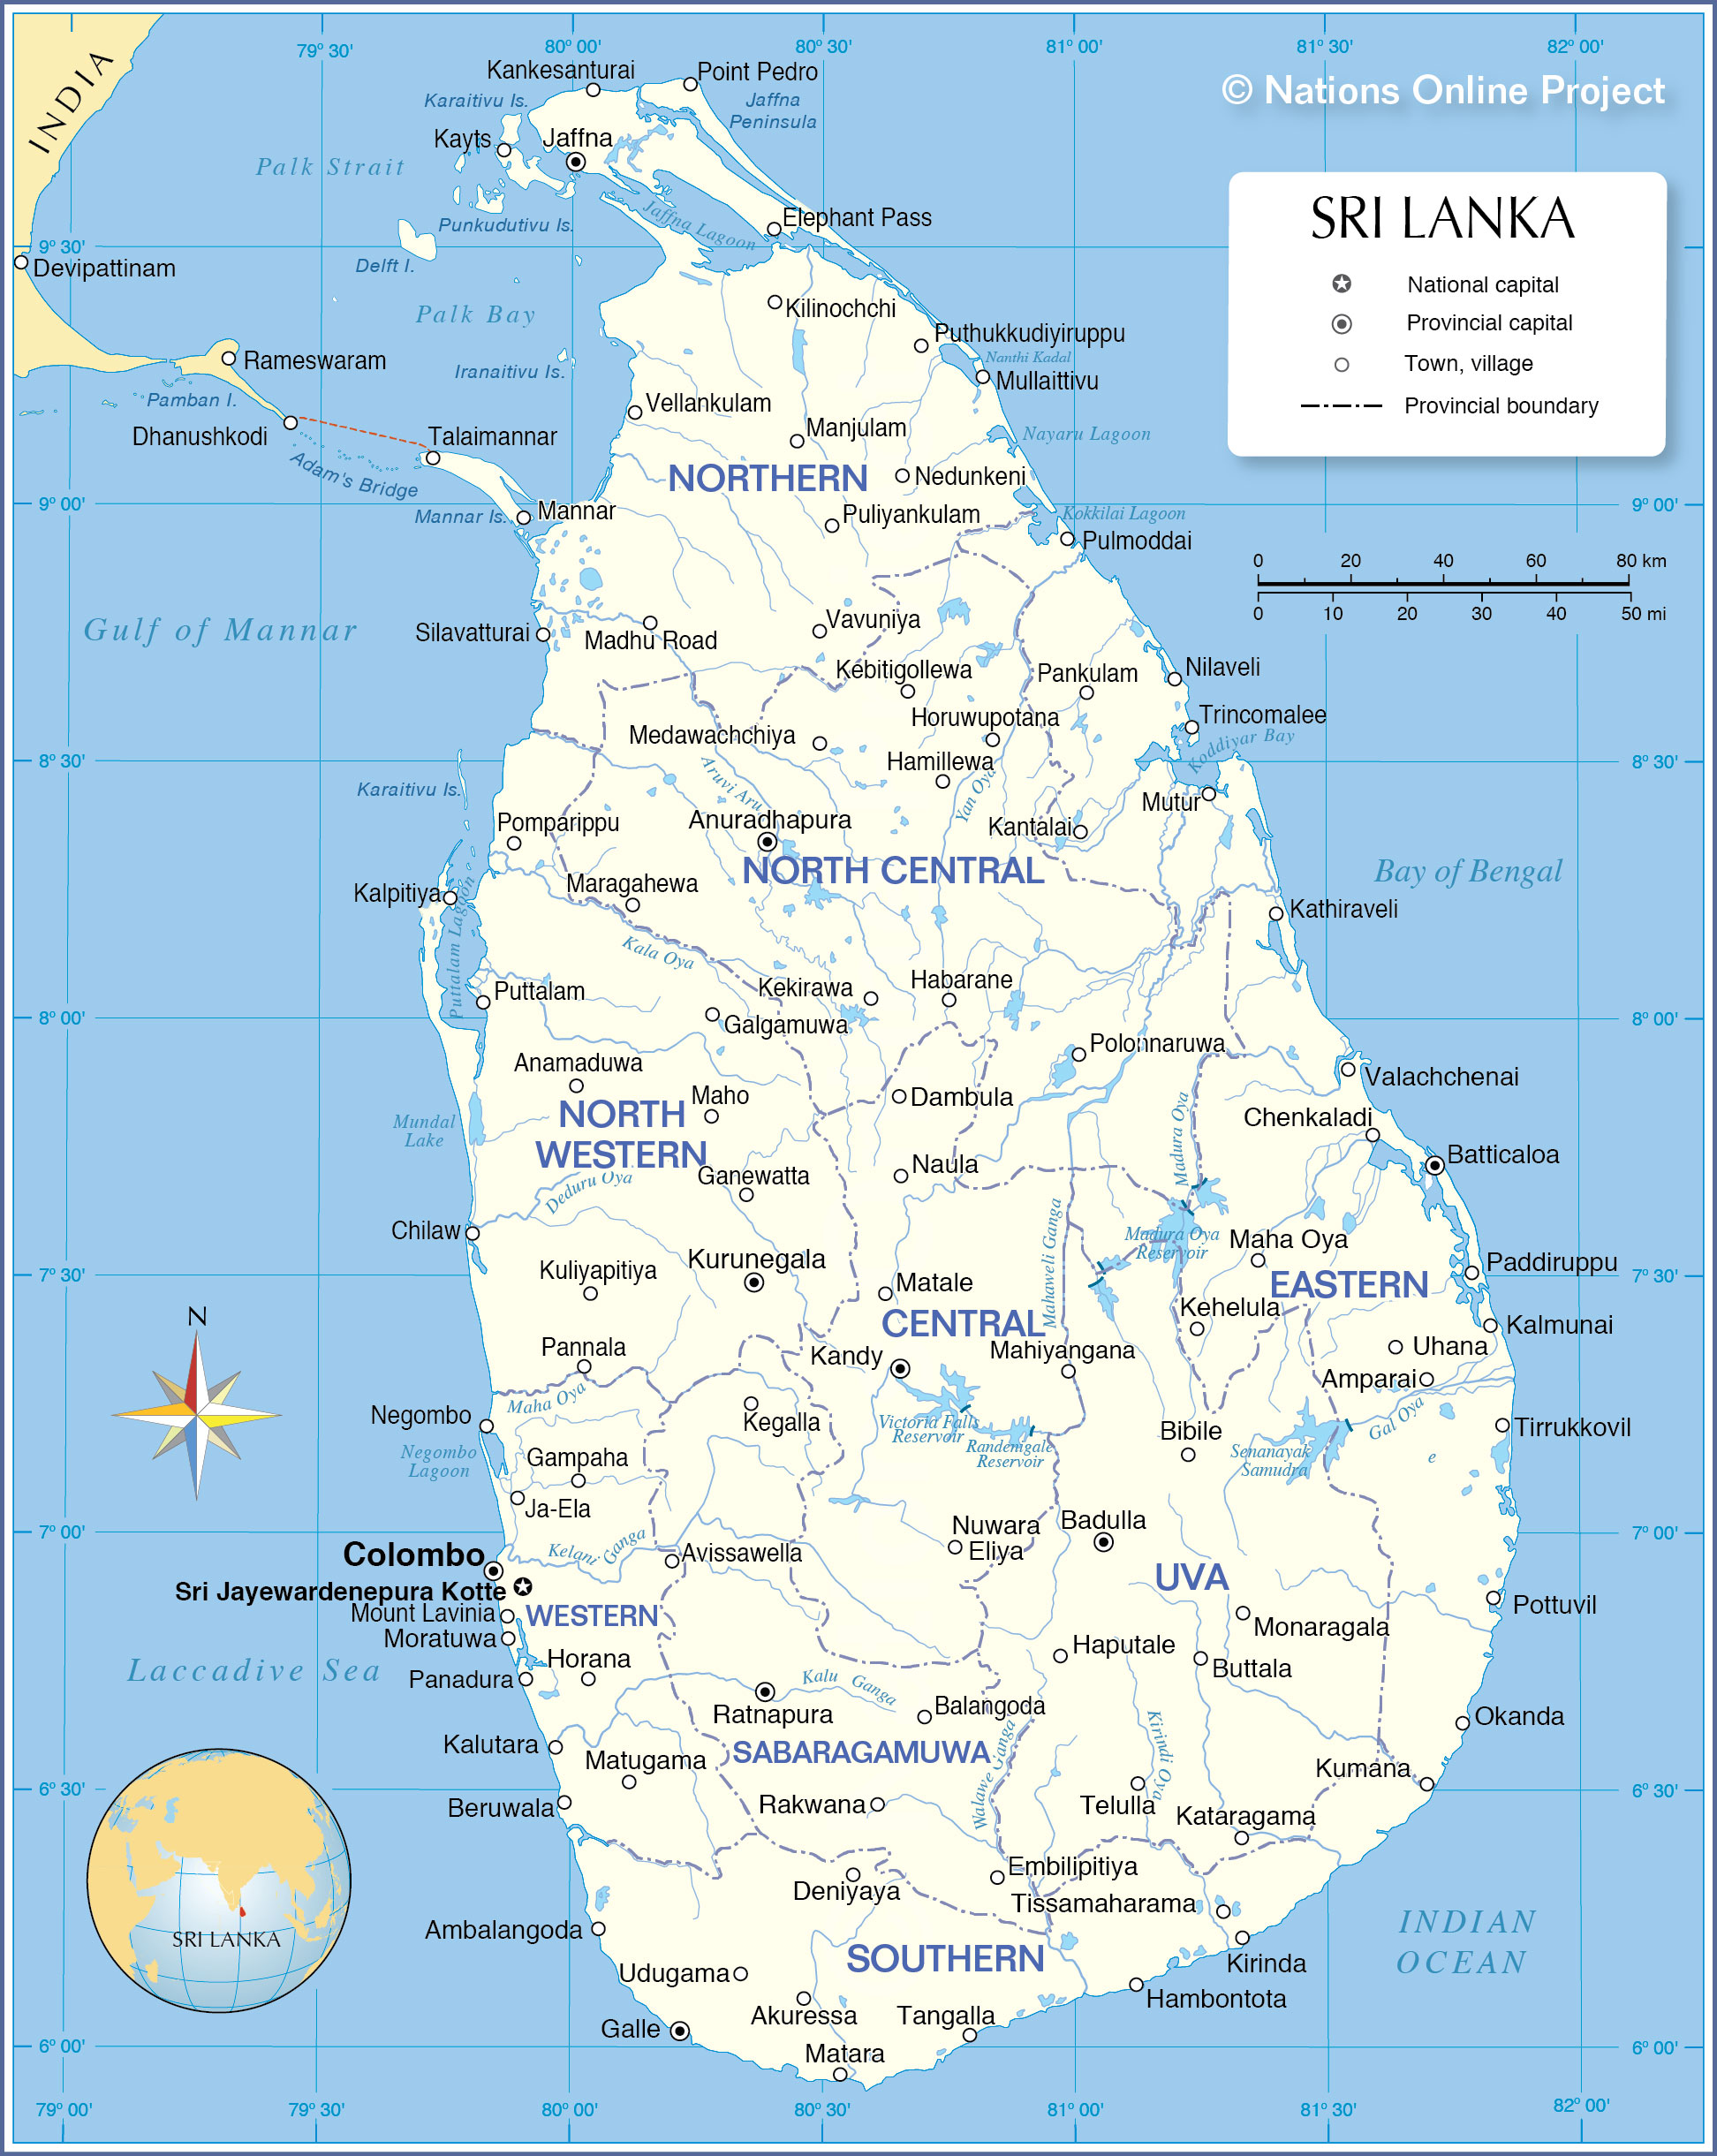 Administrative Map of Sri Lanka - Nations Online Project